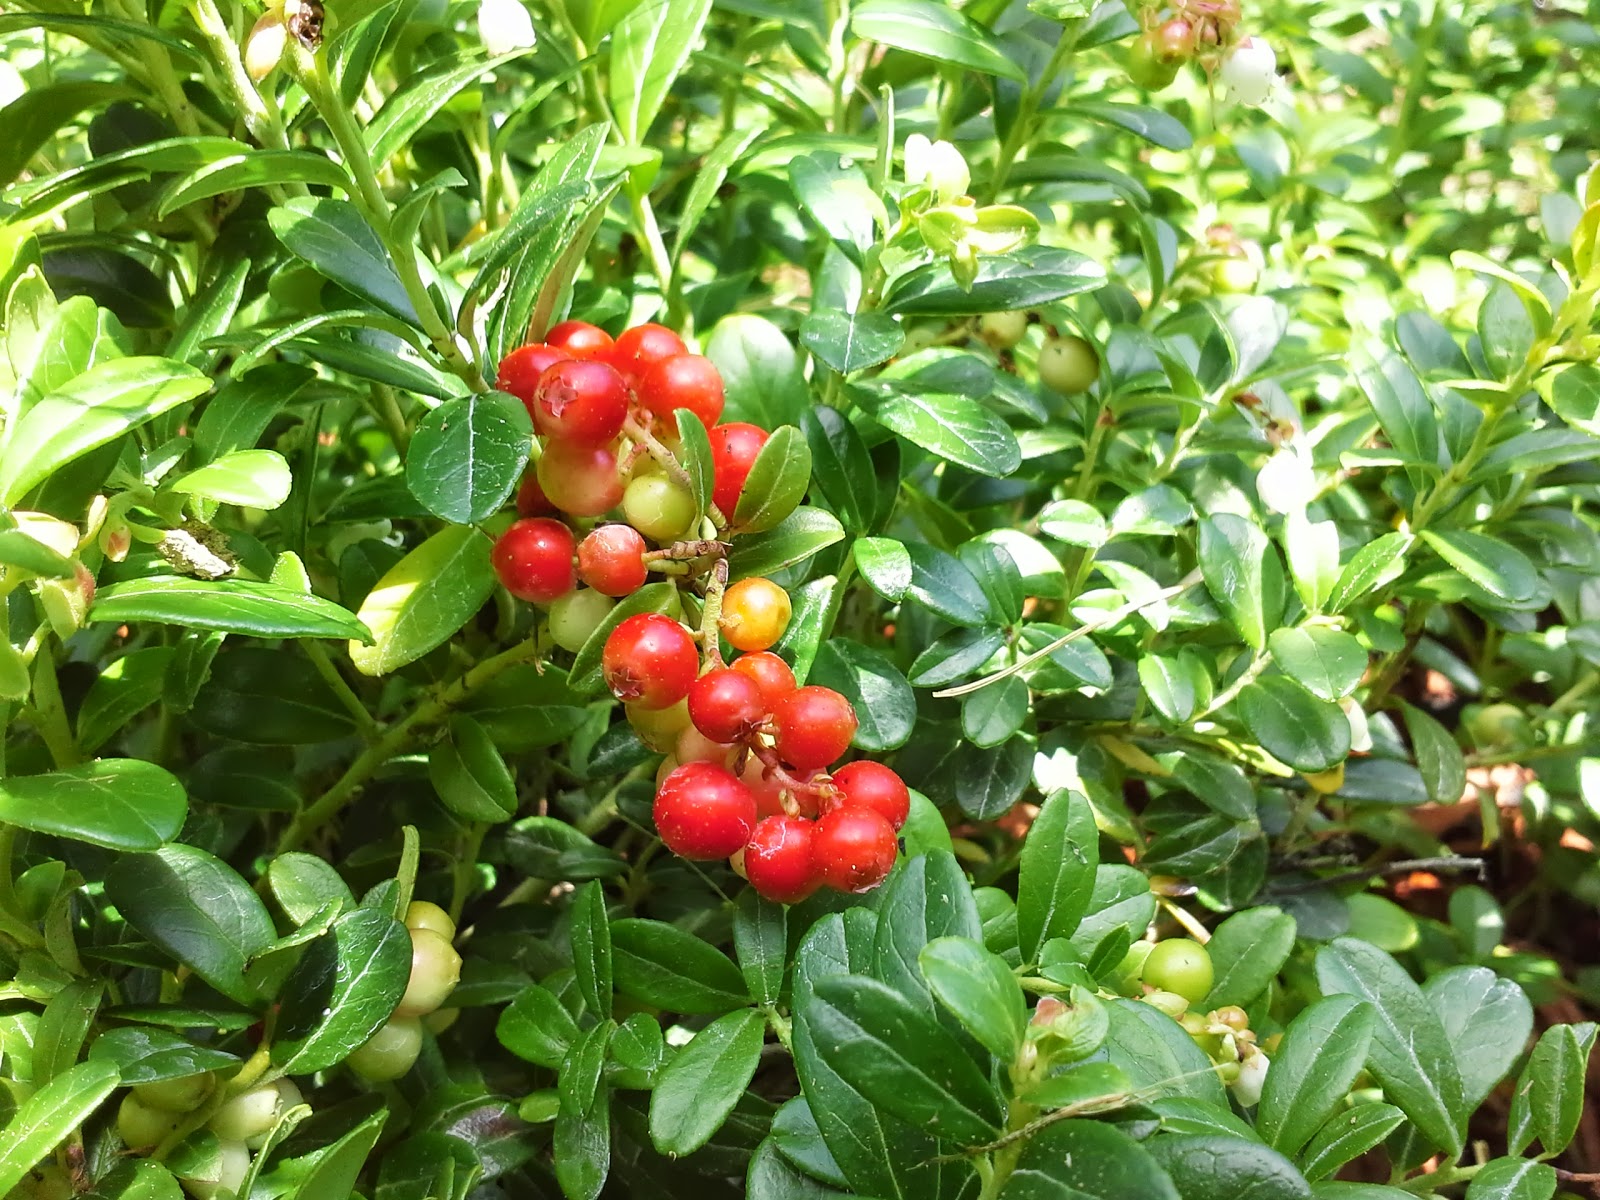 Lingonberries - ground cover with the taste of cranberries | Easy ...